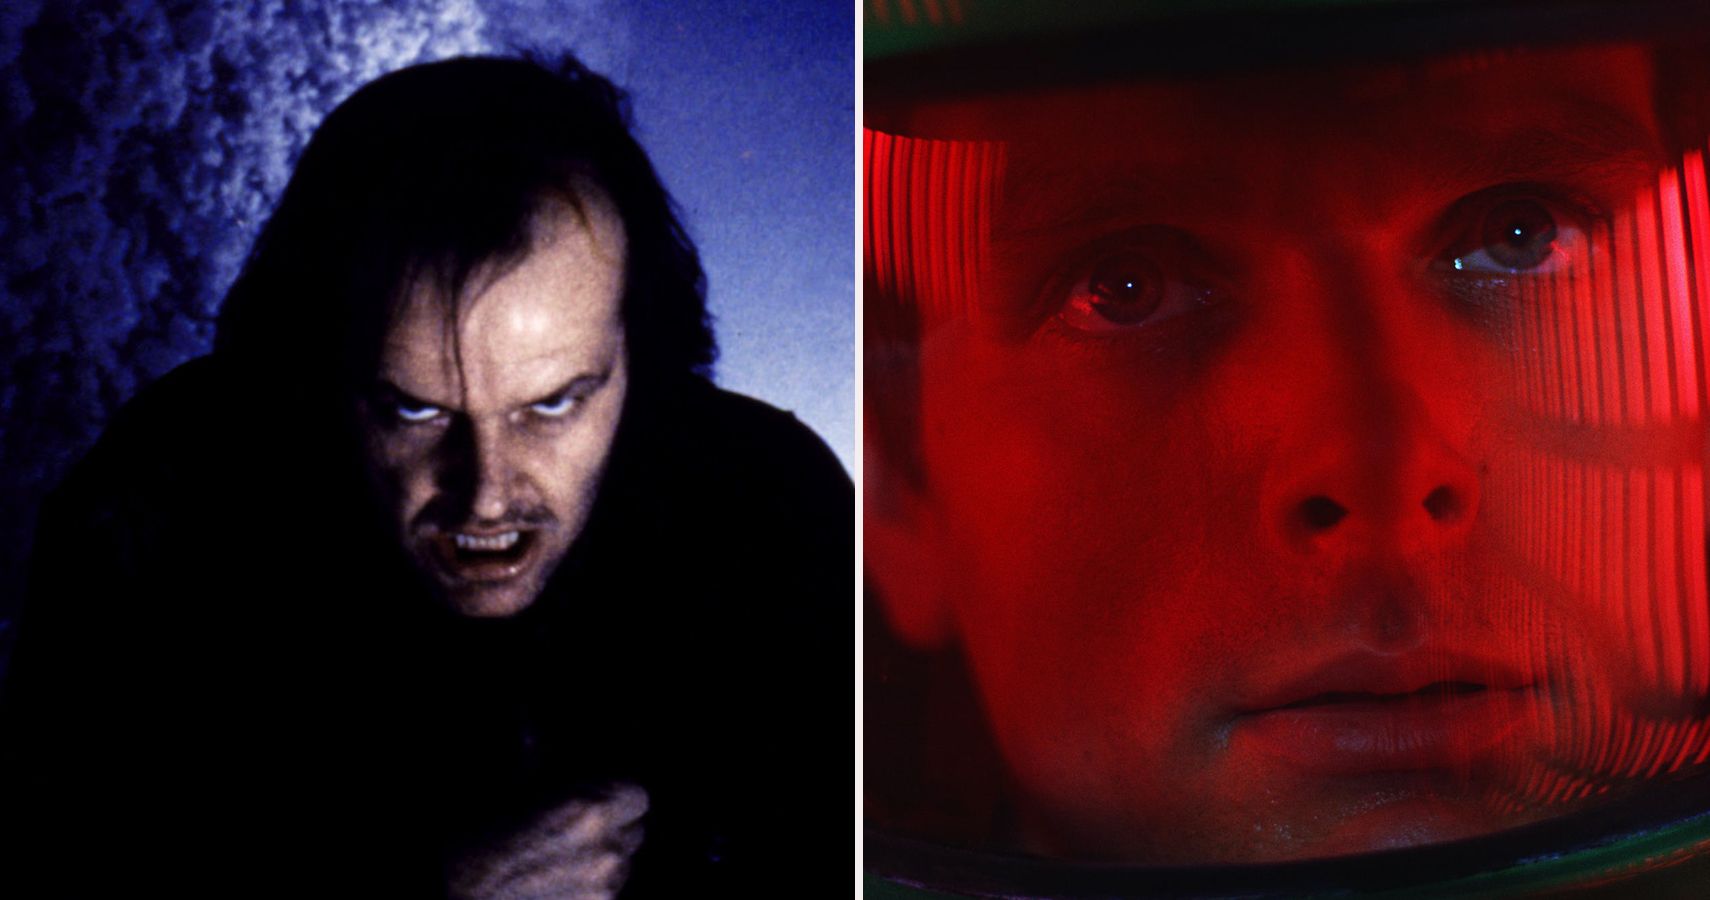 The Shining and 2001 A Space Odyssey Heading